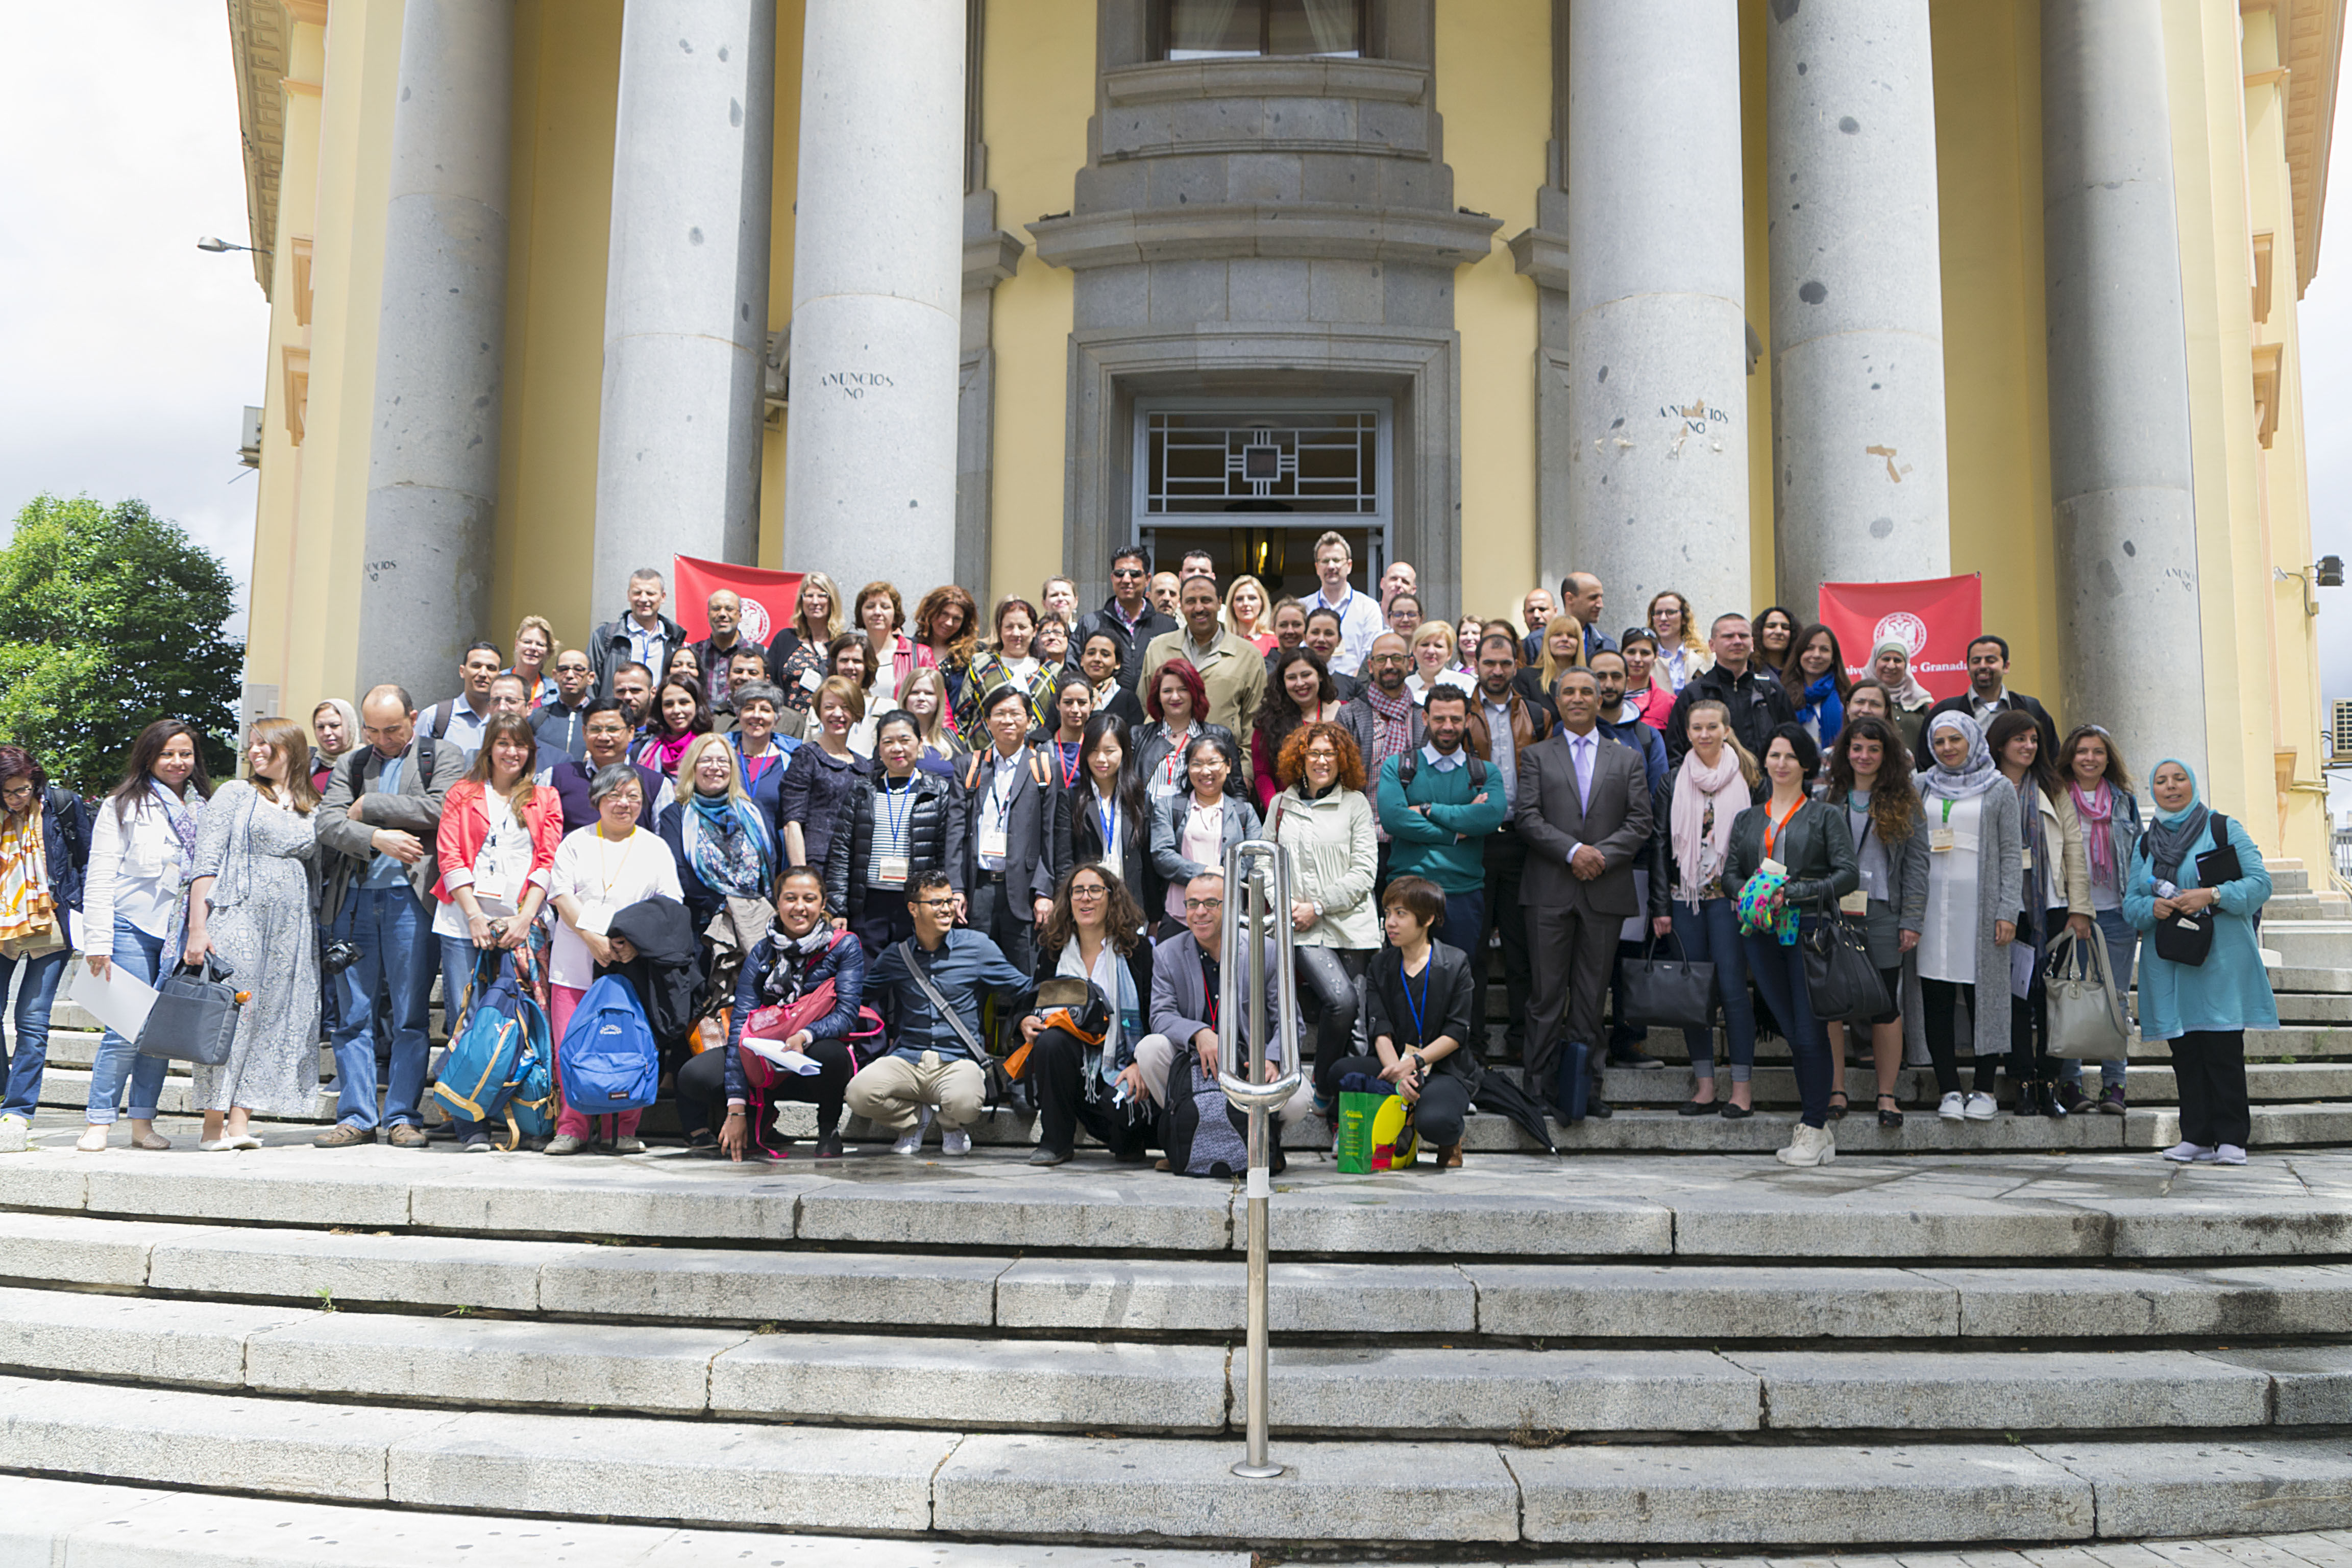 Over 70 participants posing for a photo in front of the former Faculty of Medicine